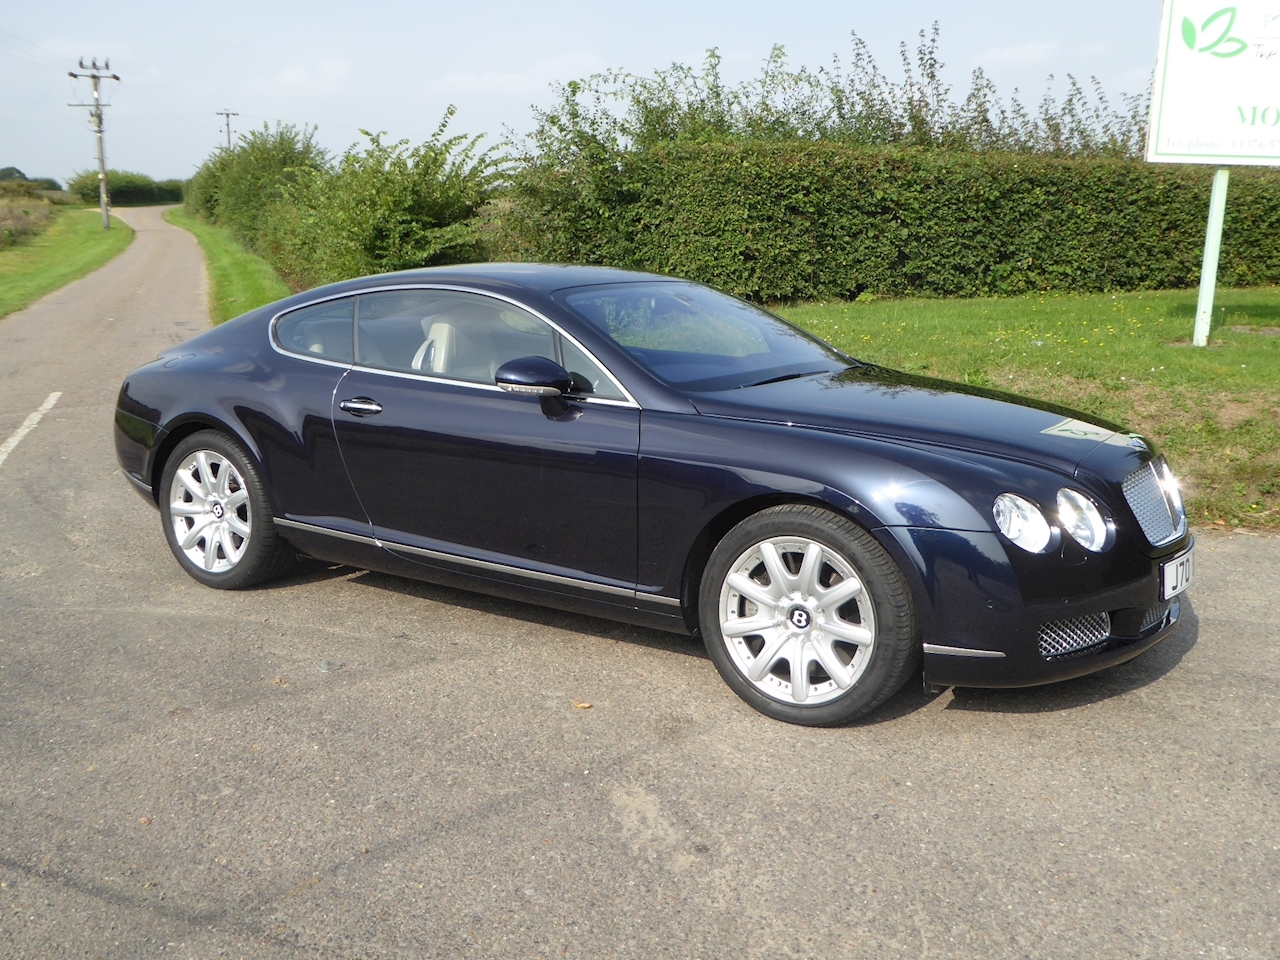 6.0 GT Coupe 2dr Petrol Automatic (410 g/km, 552 bhp)